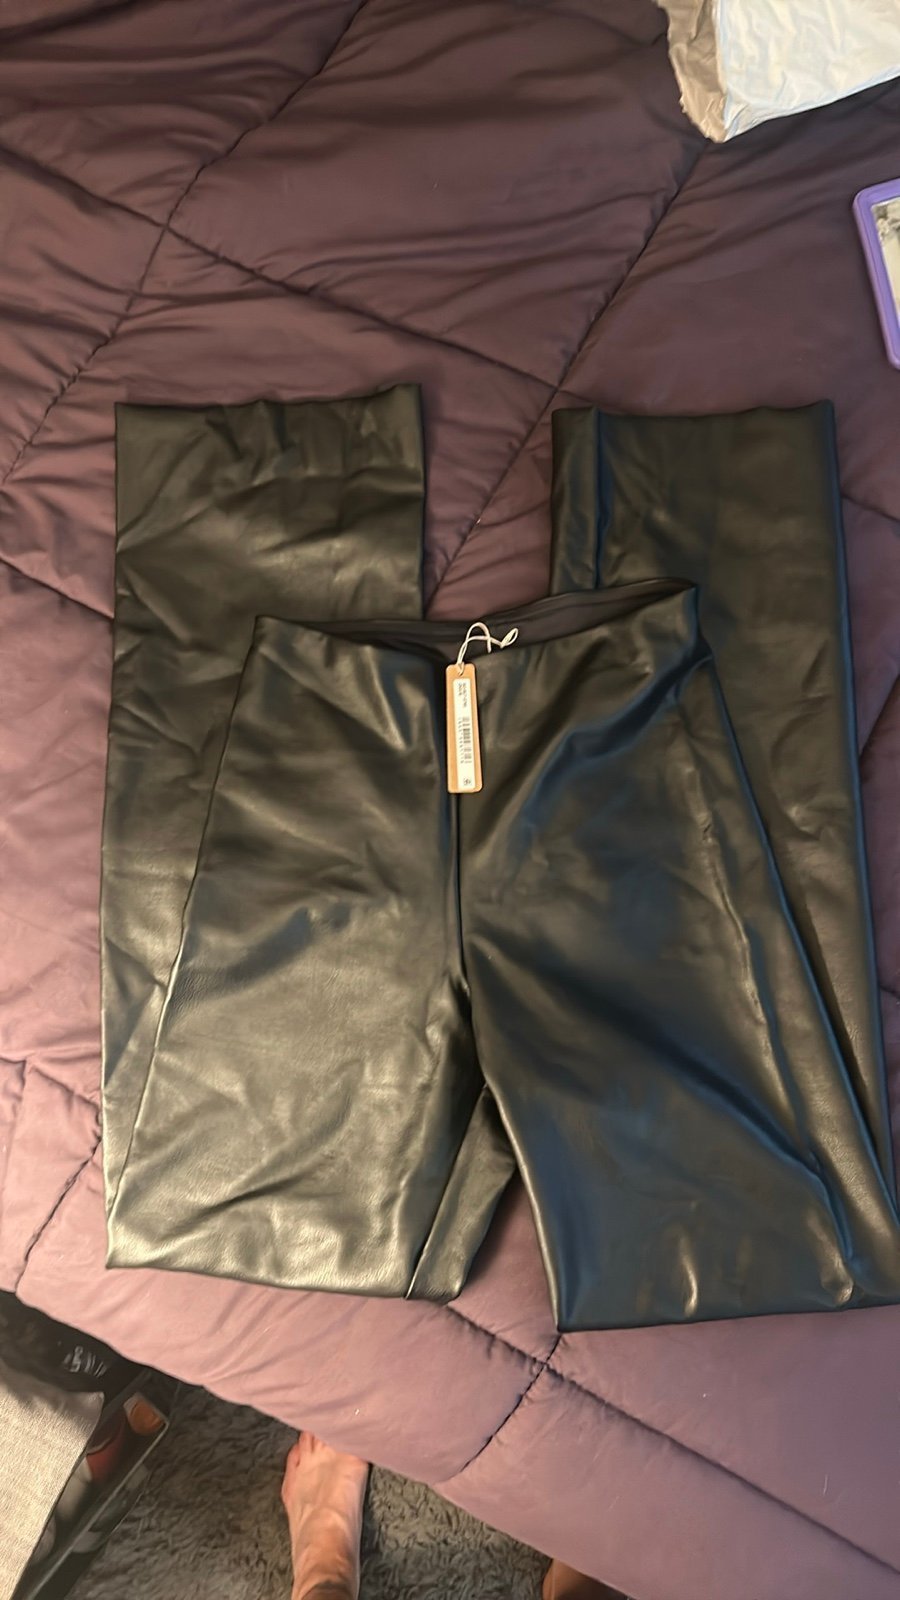 high discount NWT SKIMS FAUX LEATHER PANTS lvp7omjom New Style